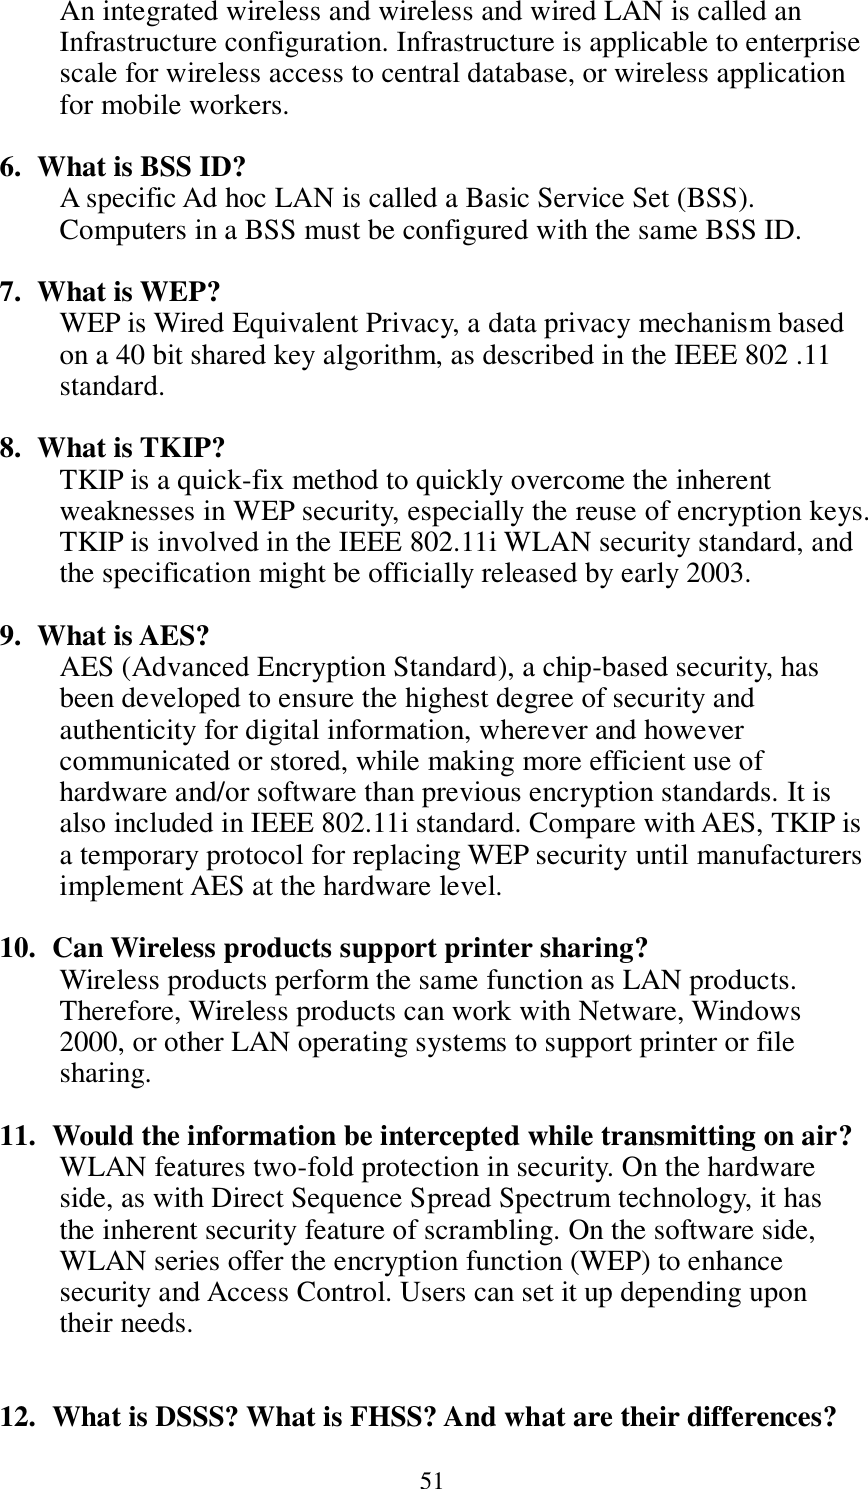  51 An integrated wireless and wireless and wired LAN is called an Infrastructure configuration. Infrastructure is applicable to enterprise scale for wireless access to central database, or wireless application for mobile workers.  6. What is BSS ID? A specific Ad hoc LAN is called a Basic Service Set (BSS). Computers in a BSS must be configured with the same BSS ID.  7. What is WEP? WEP is Wired Equivalent Privacy, a data privacy mechanism based on a 40 bit shared key algorithm, as described in the IEEE 802 .11 standard.  8. What is TKIP? TKIP is a quick-fix method to quickly overcome the inherent weaknesses in WEP security, especially the reuse of encryption keys. TKIP is involved in the IEEE 802.11i WLAN security standard, and the specification might be officially released by early 2003.  9. What is AES? AES (Advanced Encryption Standard), a chip-based security, has been developed to ensure the highest degree of security and authenticity for digital information, wherever and however communicated or stored, while making more efficient use of hardware and/or software than previous encryption standards. It is also included in IEEE 802.11i standard. Compare with AES, TKIP is a temporary protocol for replacing WEP security until manufacturers implement AES at the hardware level.  10.   Can Wireless products support printer sharing?   Wireless products perform the same function as LAN products. Therefore, Wireless products can work with Netware, Windows 2000, or other LAN operating systems to support printer or file sharing.  11.   Would the information be intercepted while transmitting on air? WLAN features two-fold protection in security. On the hardware side, as with Direct Sequence Spread Spectrum technology, it has the inherent security feature of scrambling. On the software side, WLAN series offer the encryption function (WEP) to enhance security and Access Control. Users can set it up depending upon their needs.   12.   What is DSSS? What is FHSS? And what are their differences? 